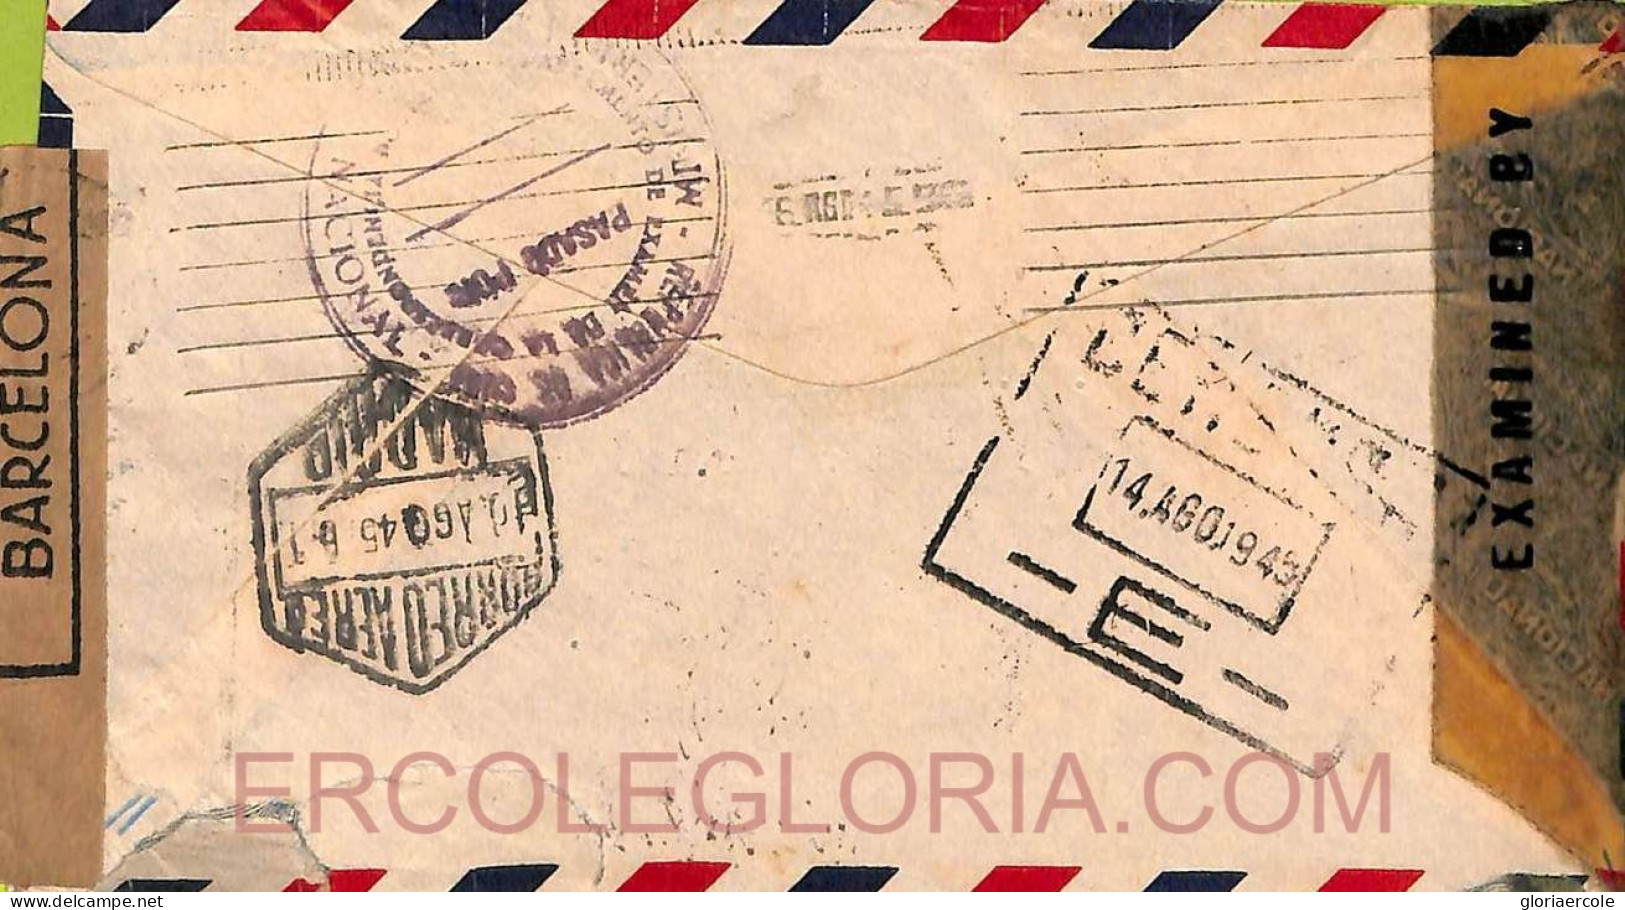 Ad6226 - HAVANA - Postal History - COVER To SPAIN 1945 - 3 Different CENSORS! - Briefe U. Dokumente